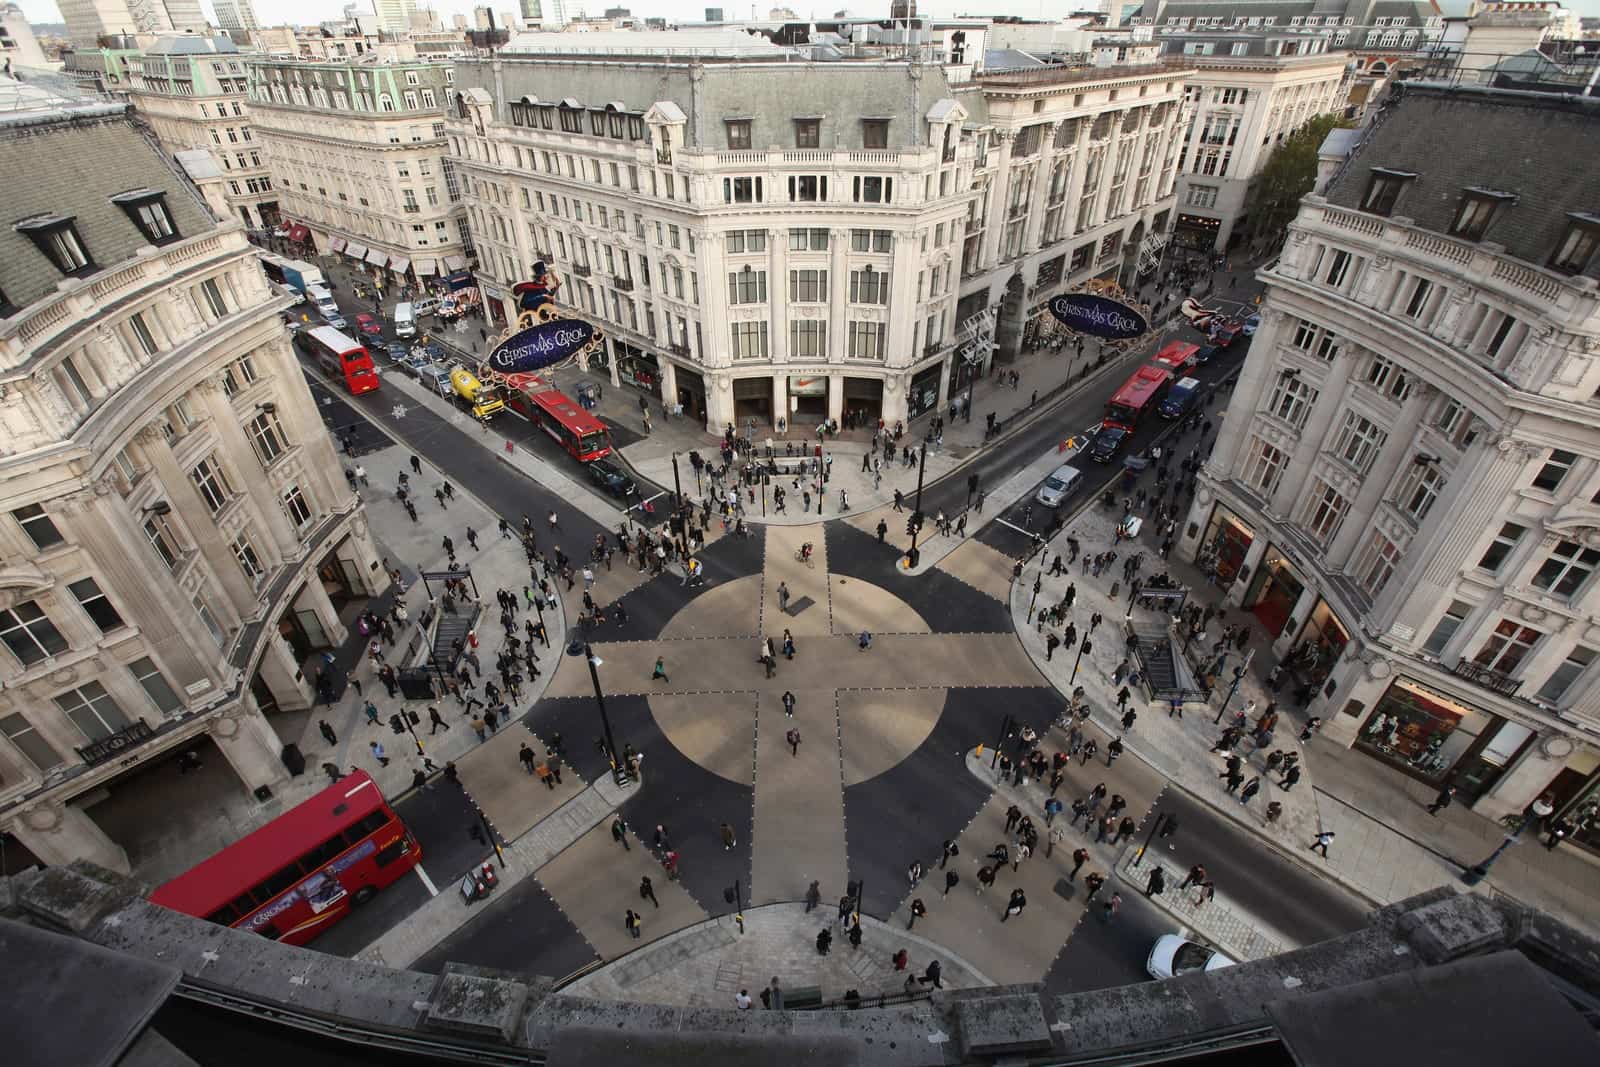 Oxford Circus crossing after the redesign. Photo by Dan Kitwood / Getty Images